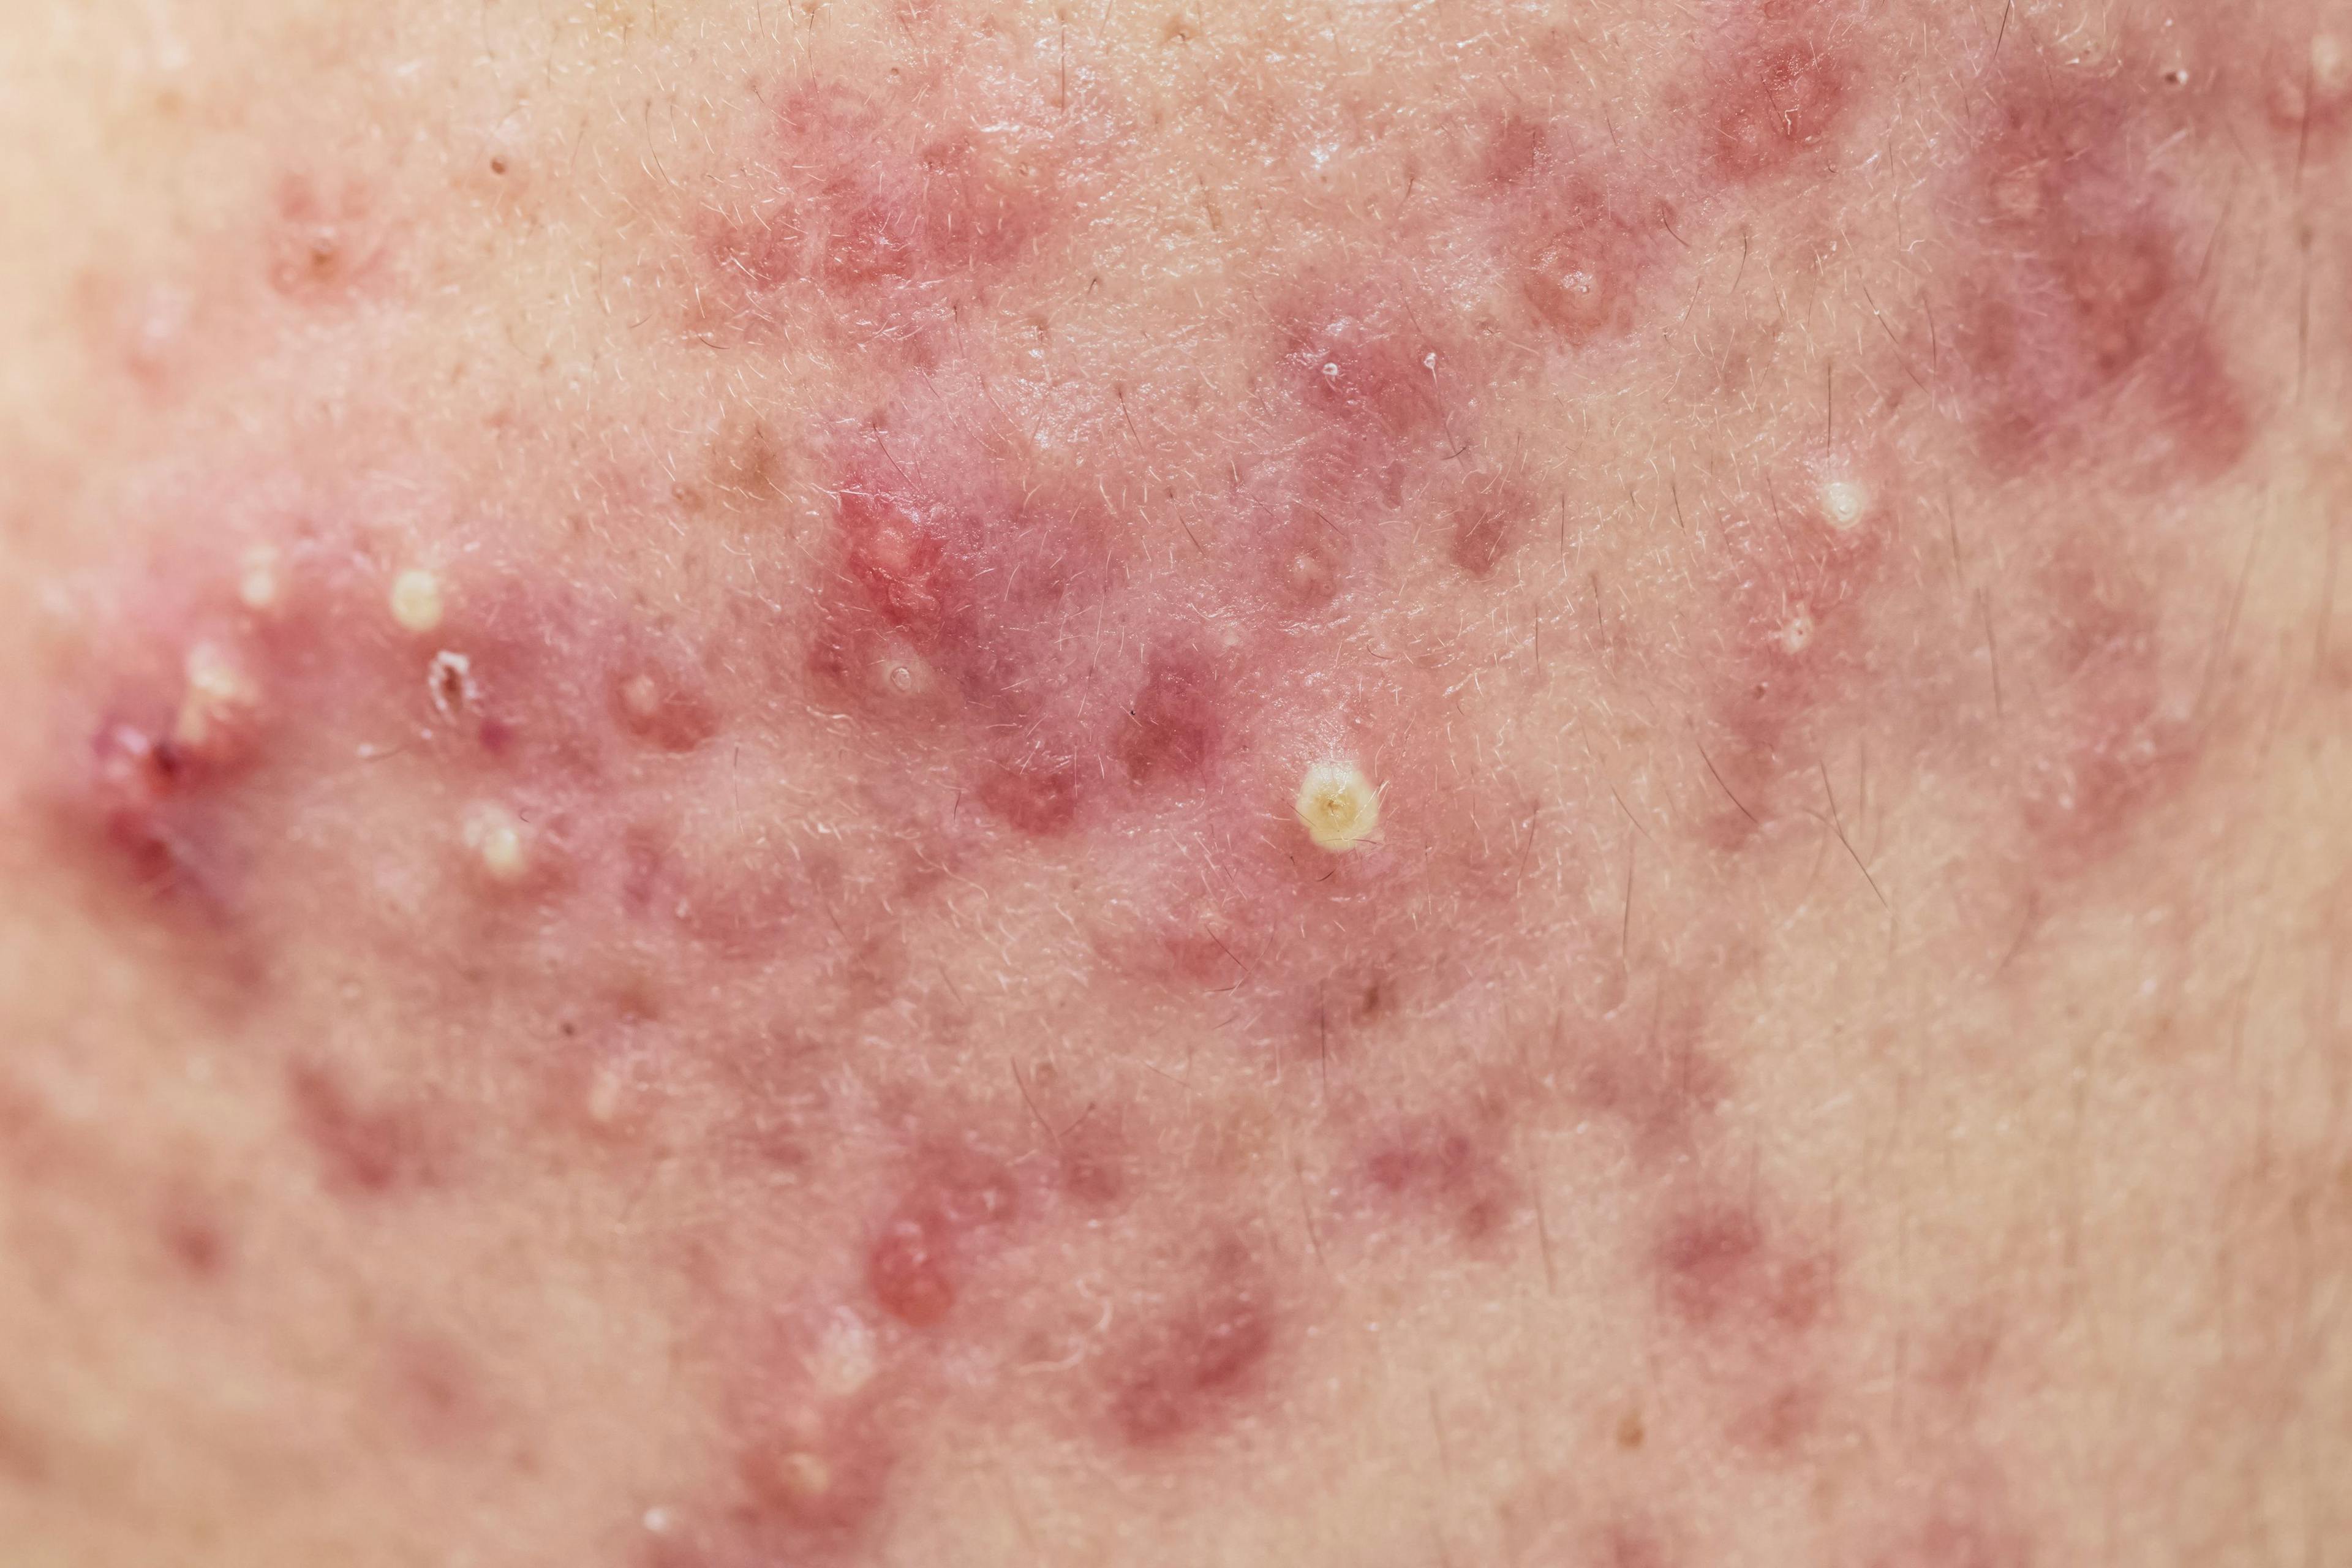 Adverse Events of ALA-PDT Treatment for Acne Evaluated